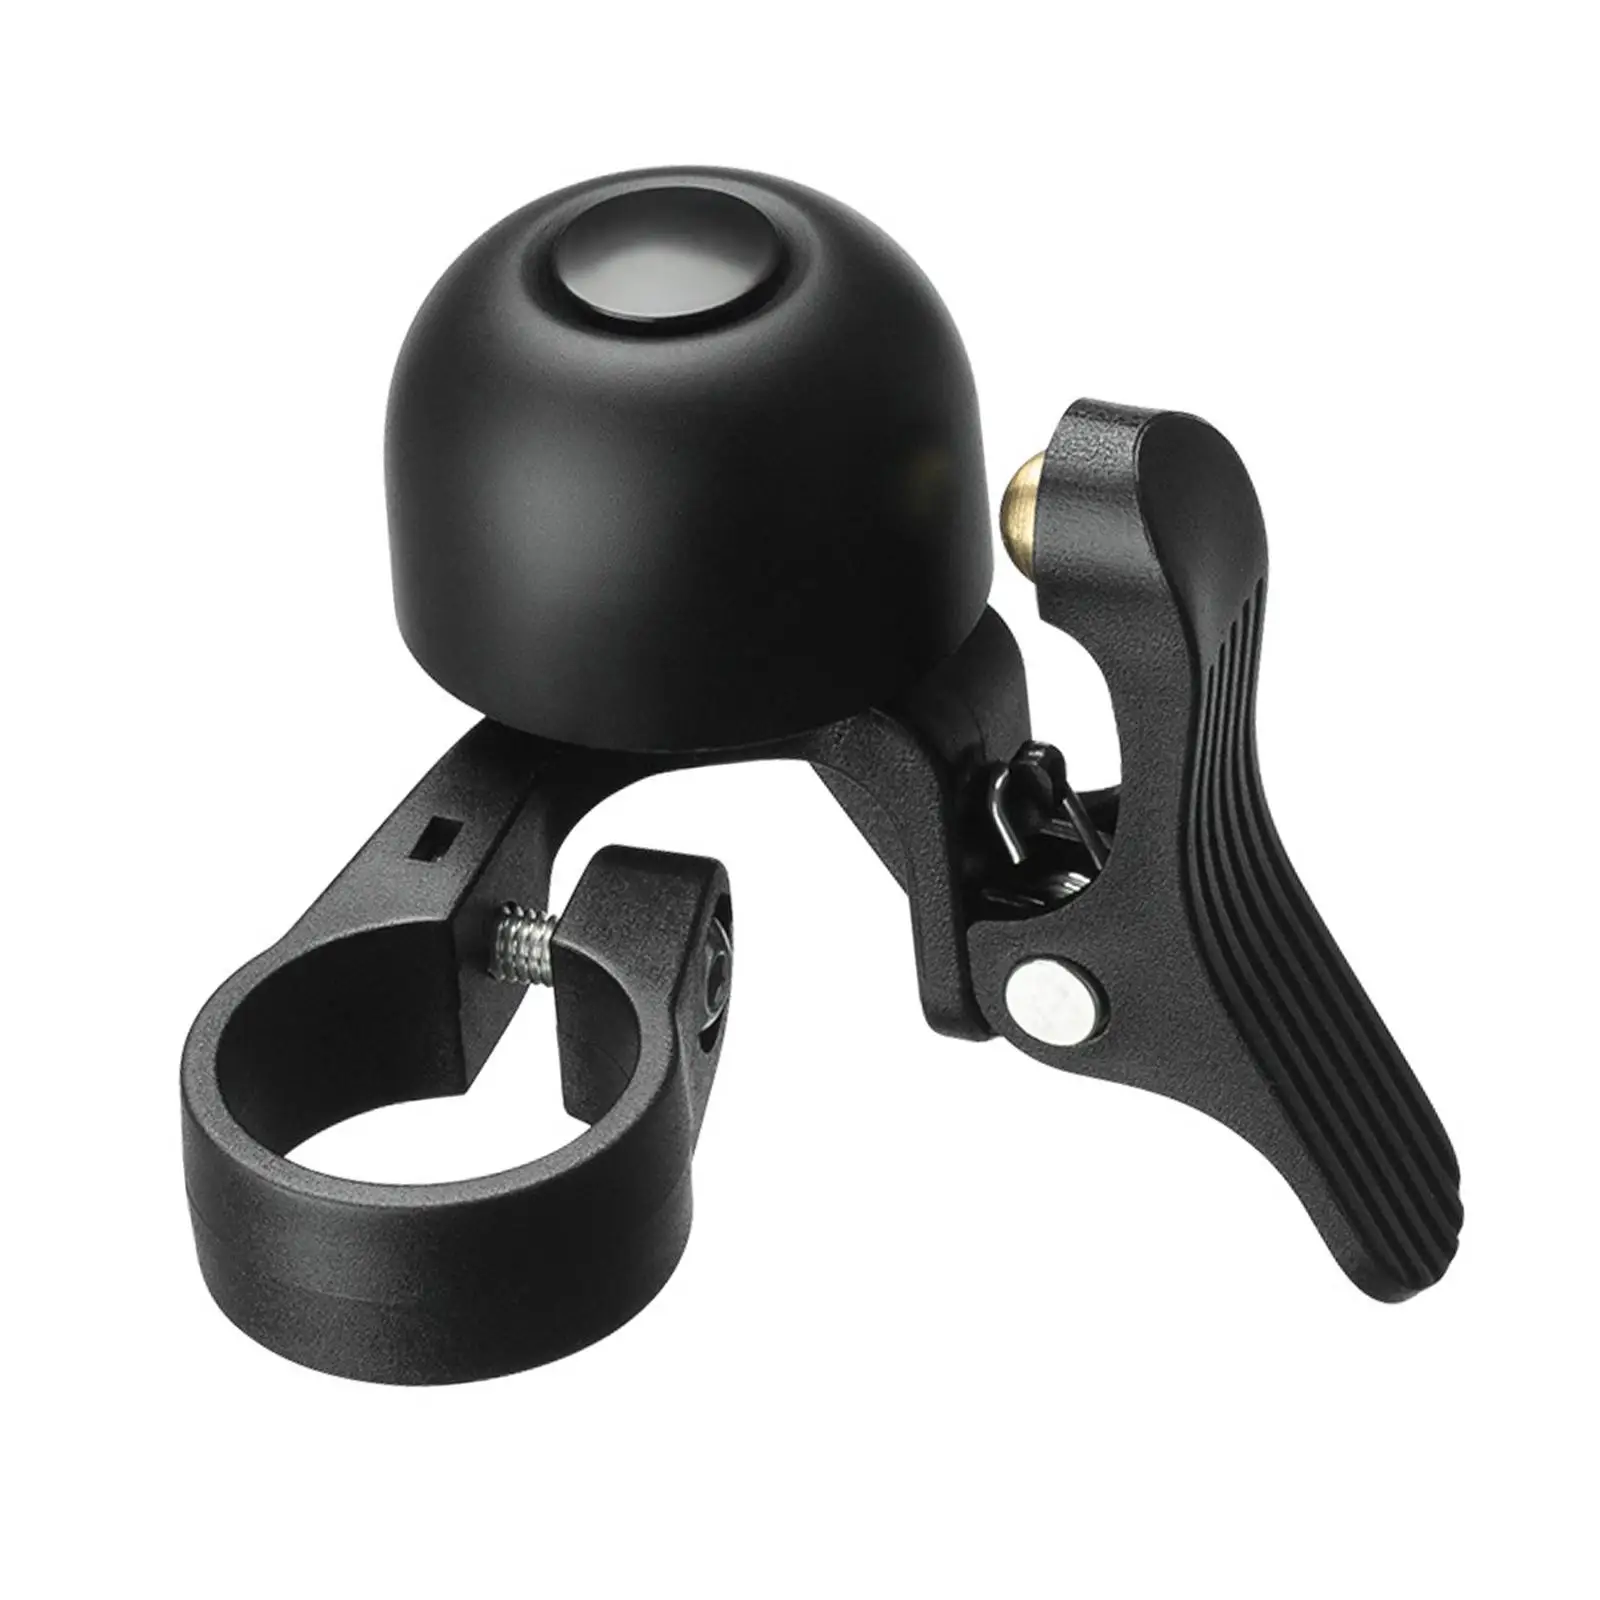 Bicycle Bell Bike Bell Small Portable Kids Adults Loud Ringing Sound Bicycle